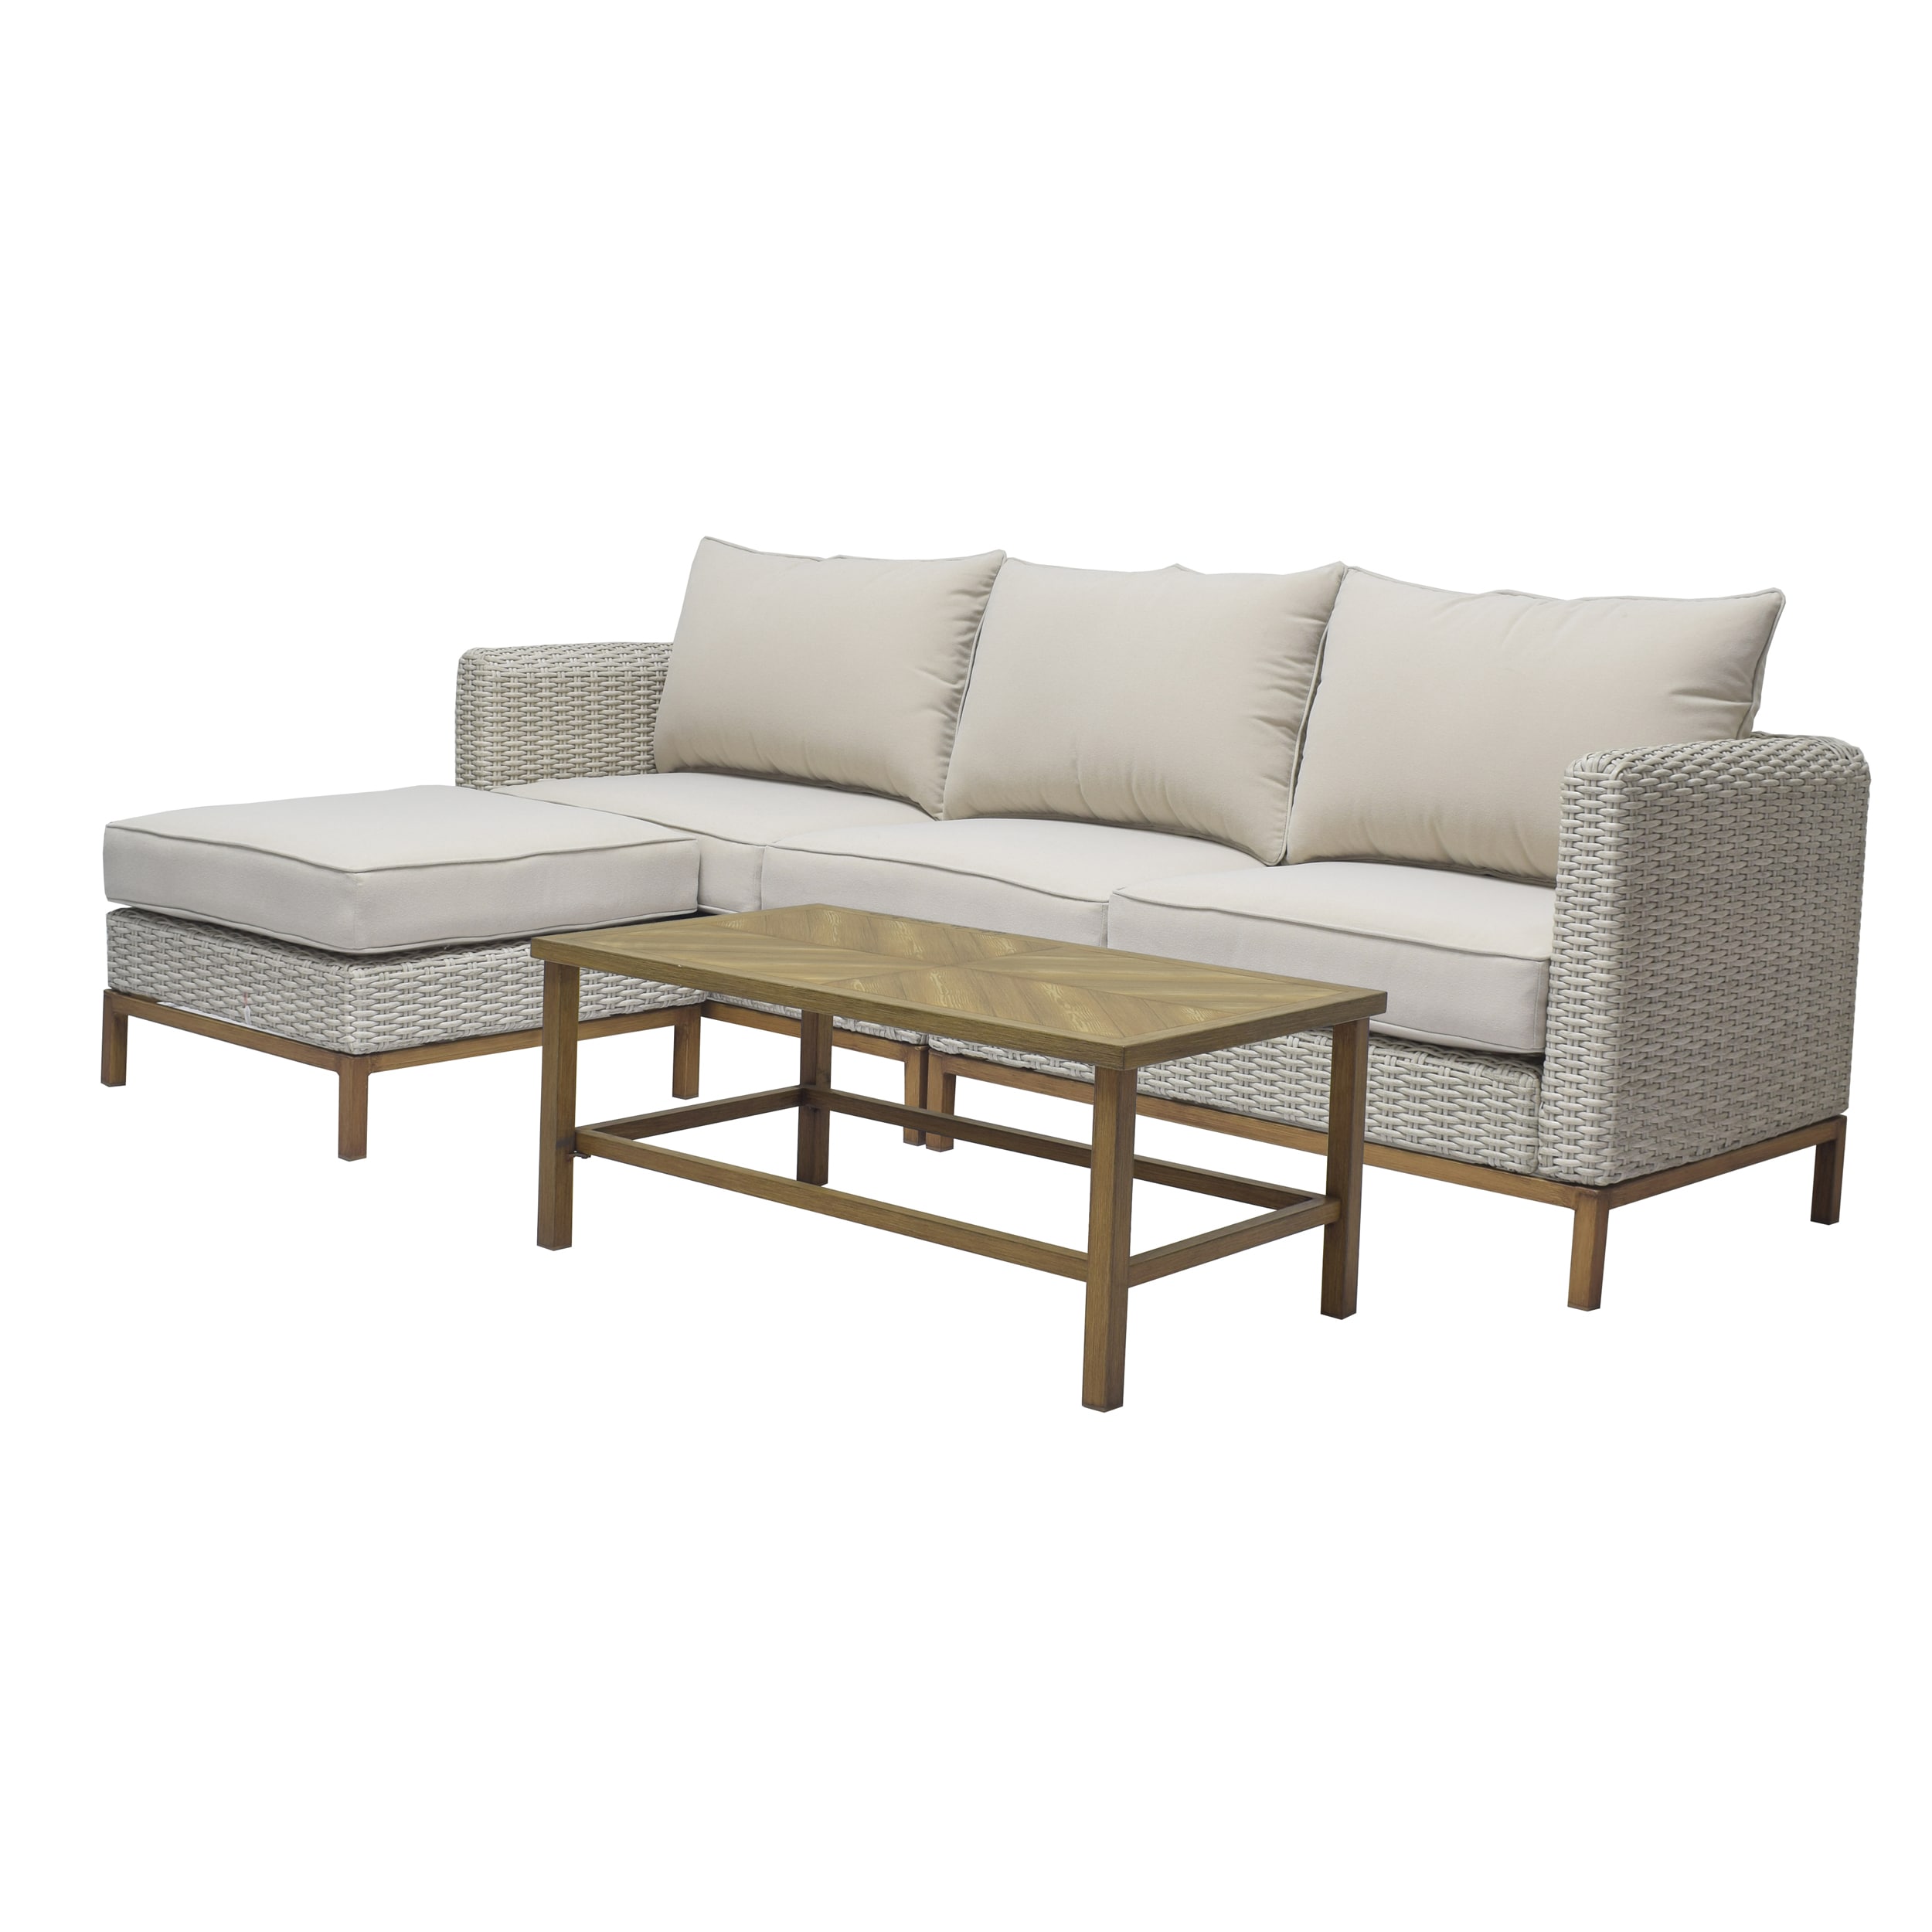 in at with Off-white the Origin Conversation 21 Patio 4-Piece Veda Conversation Sets Springs Cushions Patio Set Wicker department